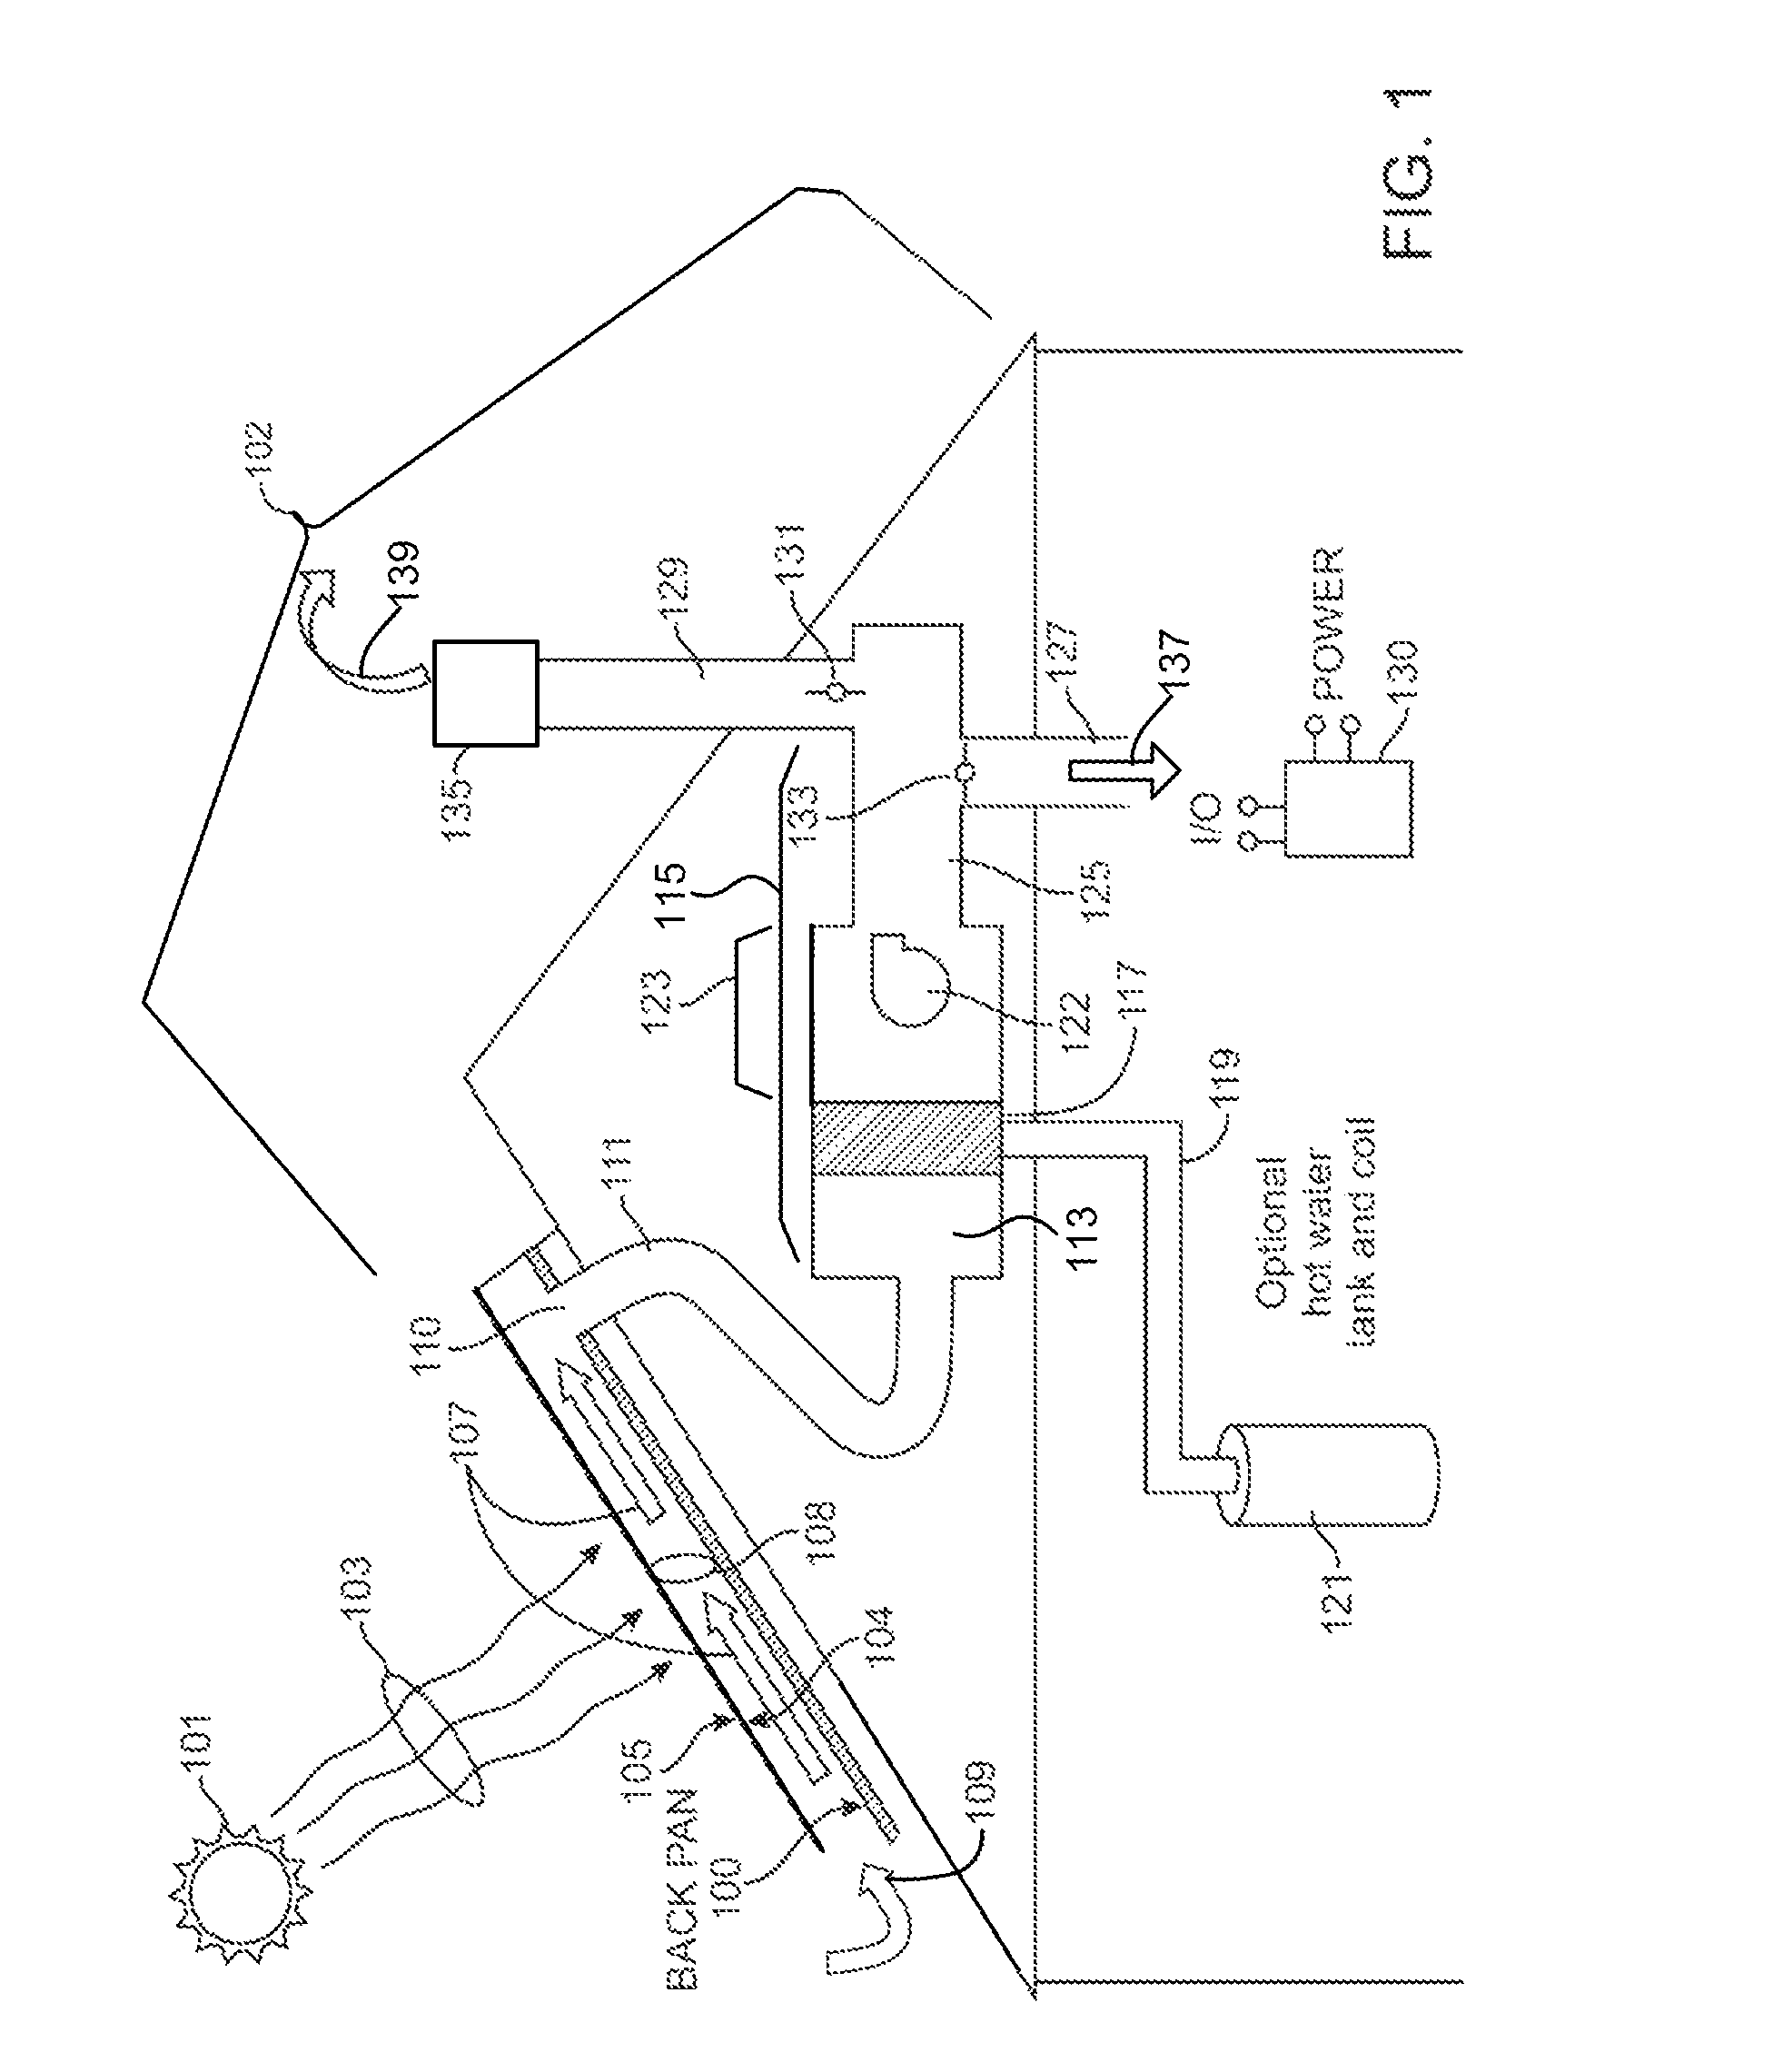 Integrated thermal module and back plate structure and related methods